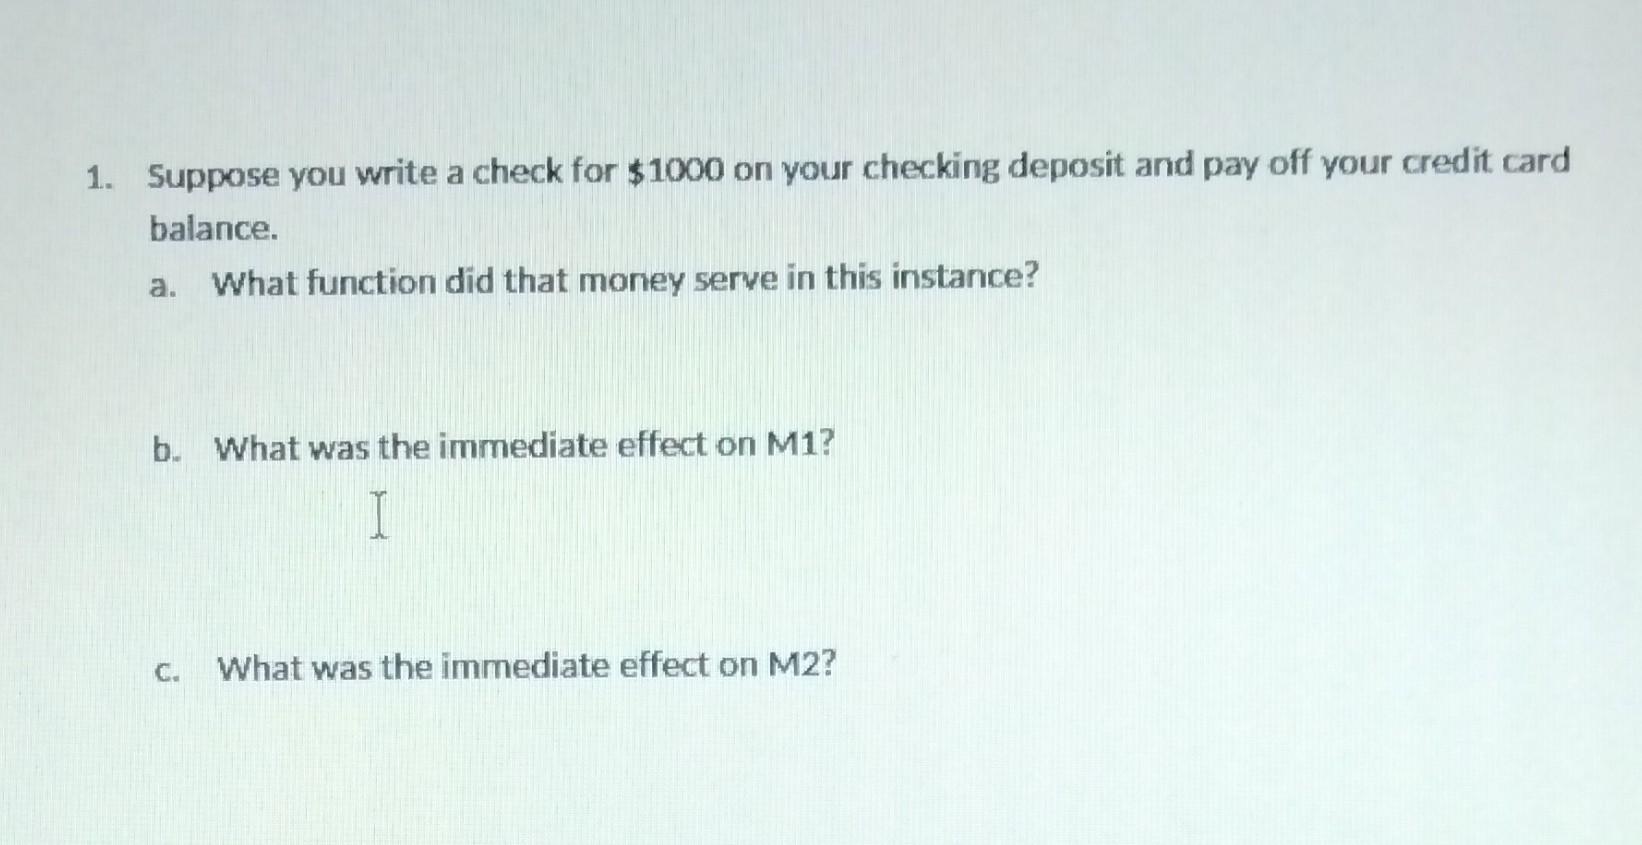 1. Suppose you write a check for ( $ 1000 ) on your checking deposit and pay off your credit card balance.
a. What functio